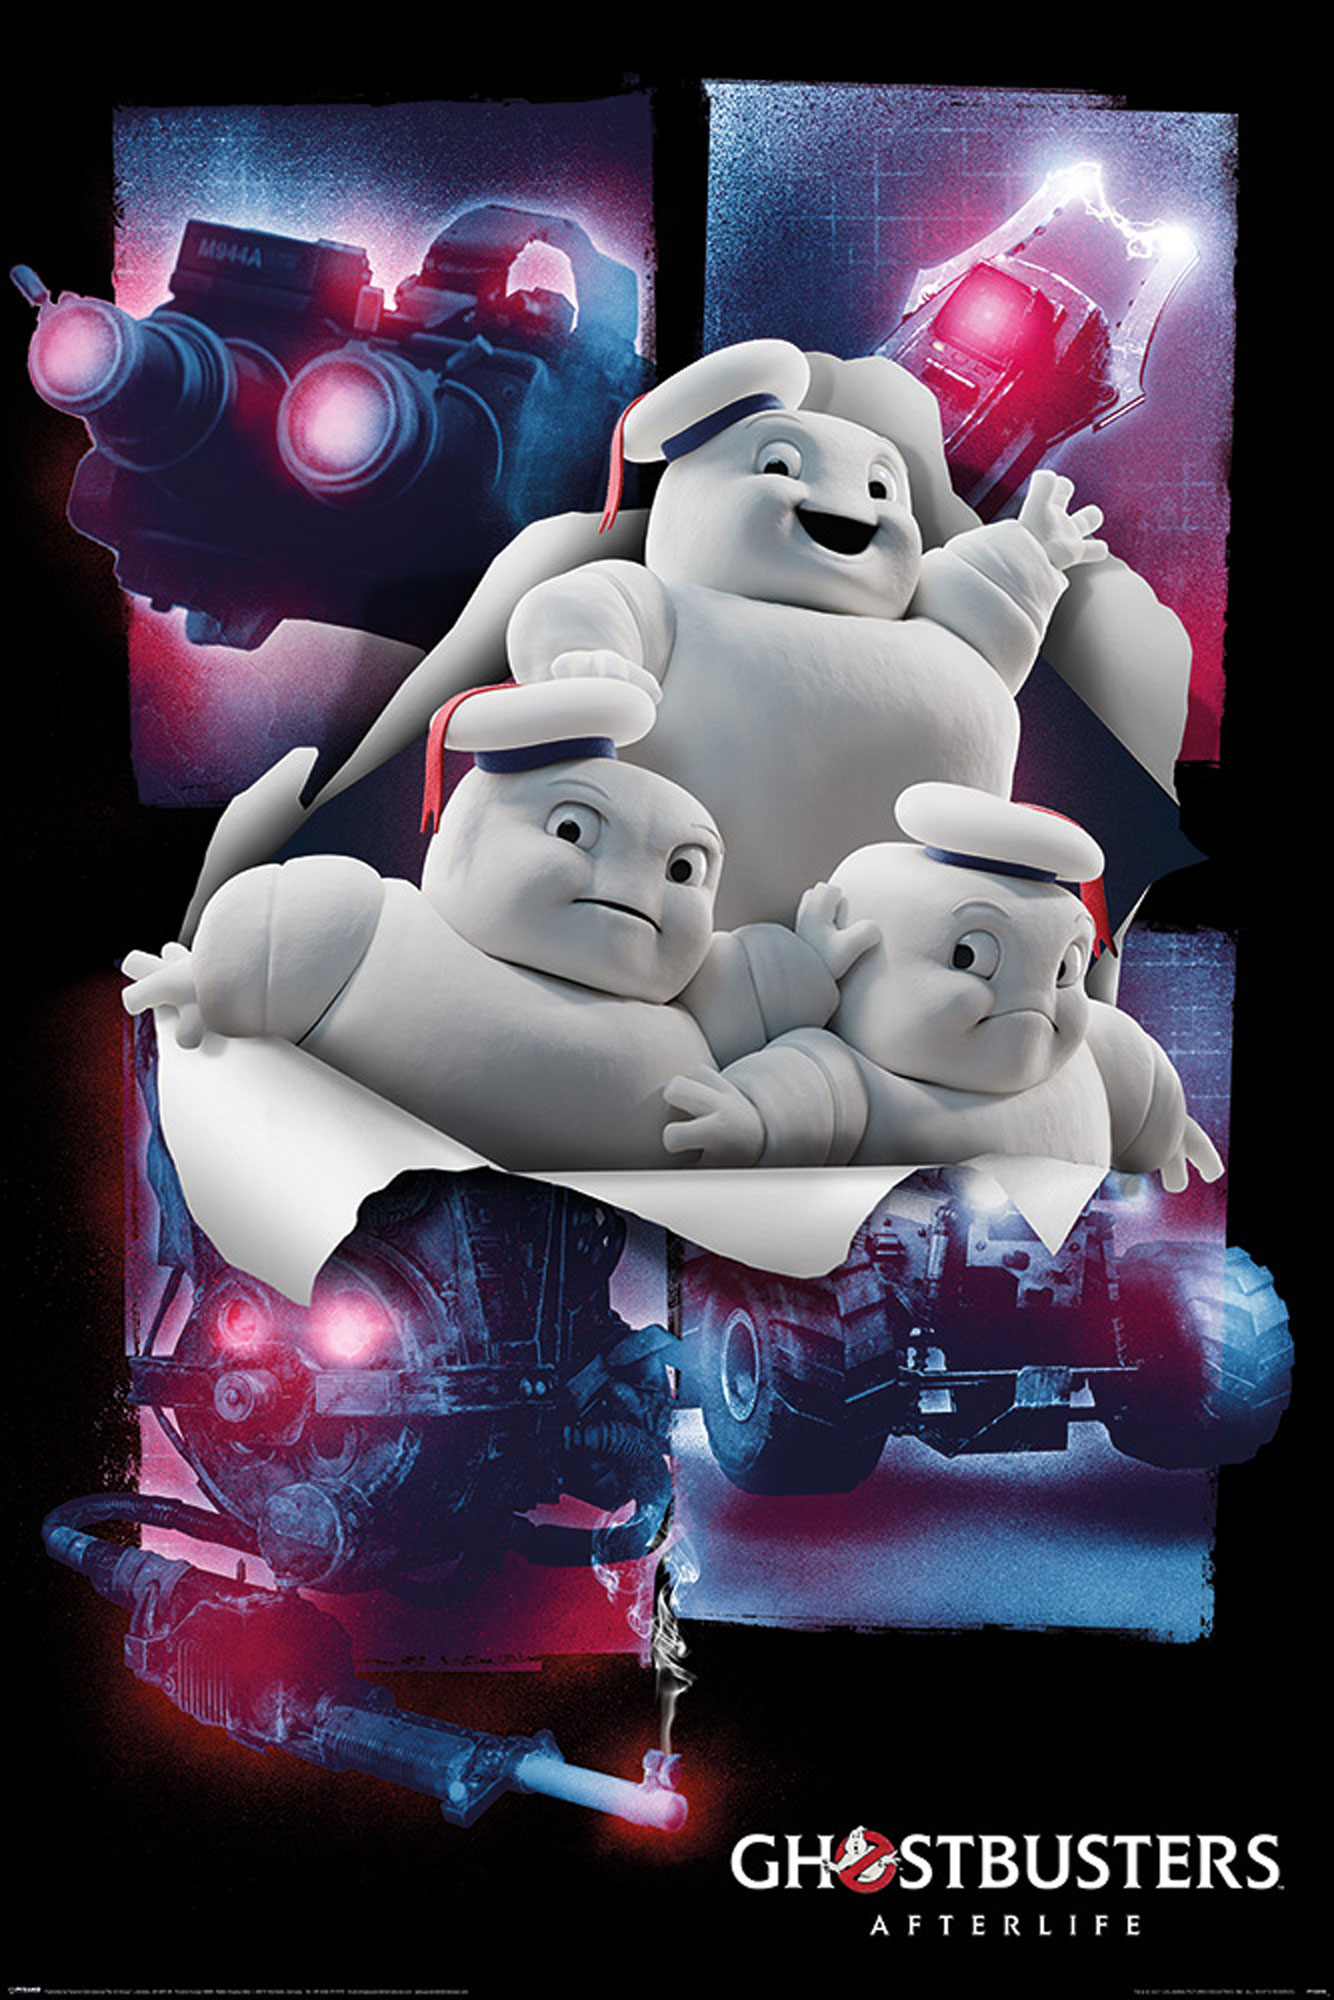 Ghostbusters - - Minipuft Afterlife Breakout